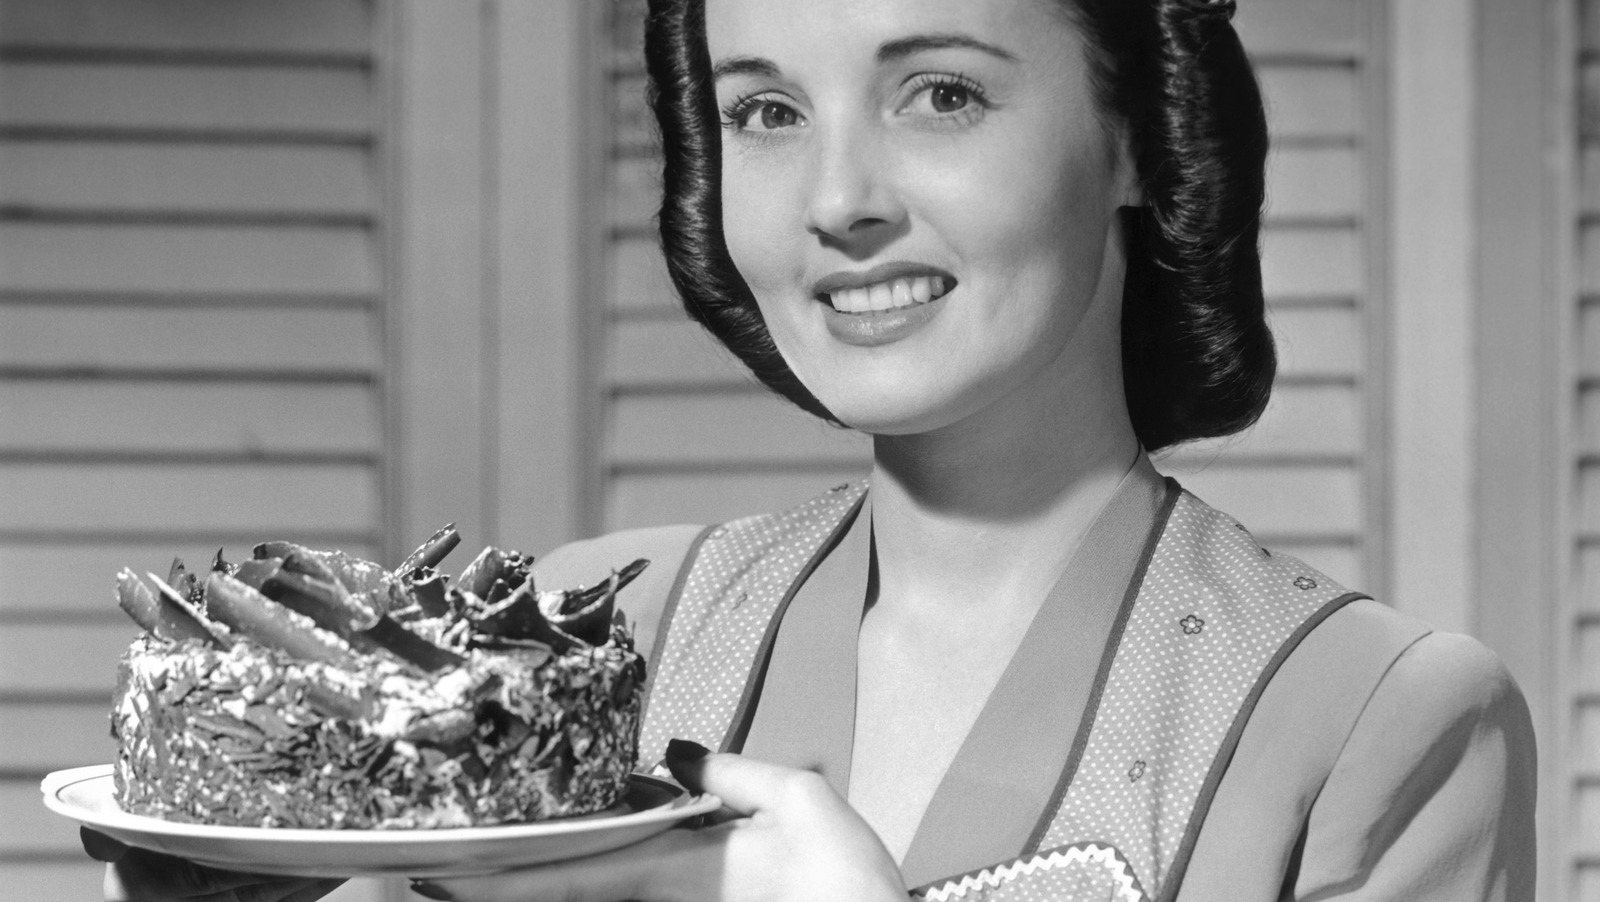 7 Desserts From The 1950s We're Really Not Too Sure About